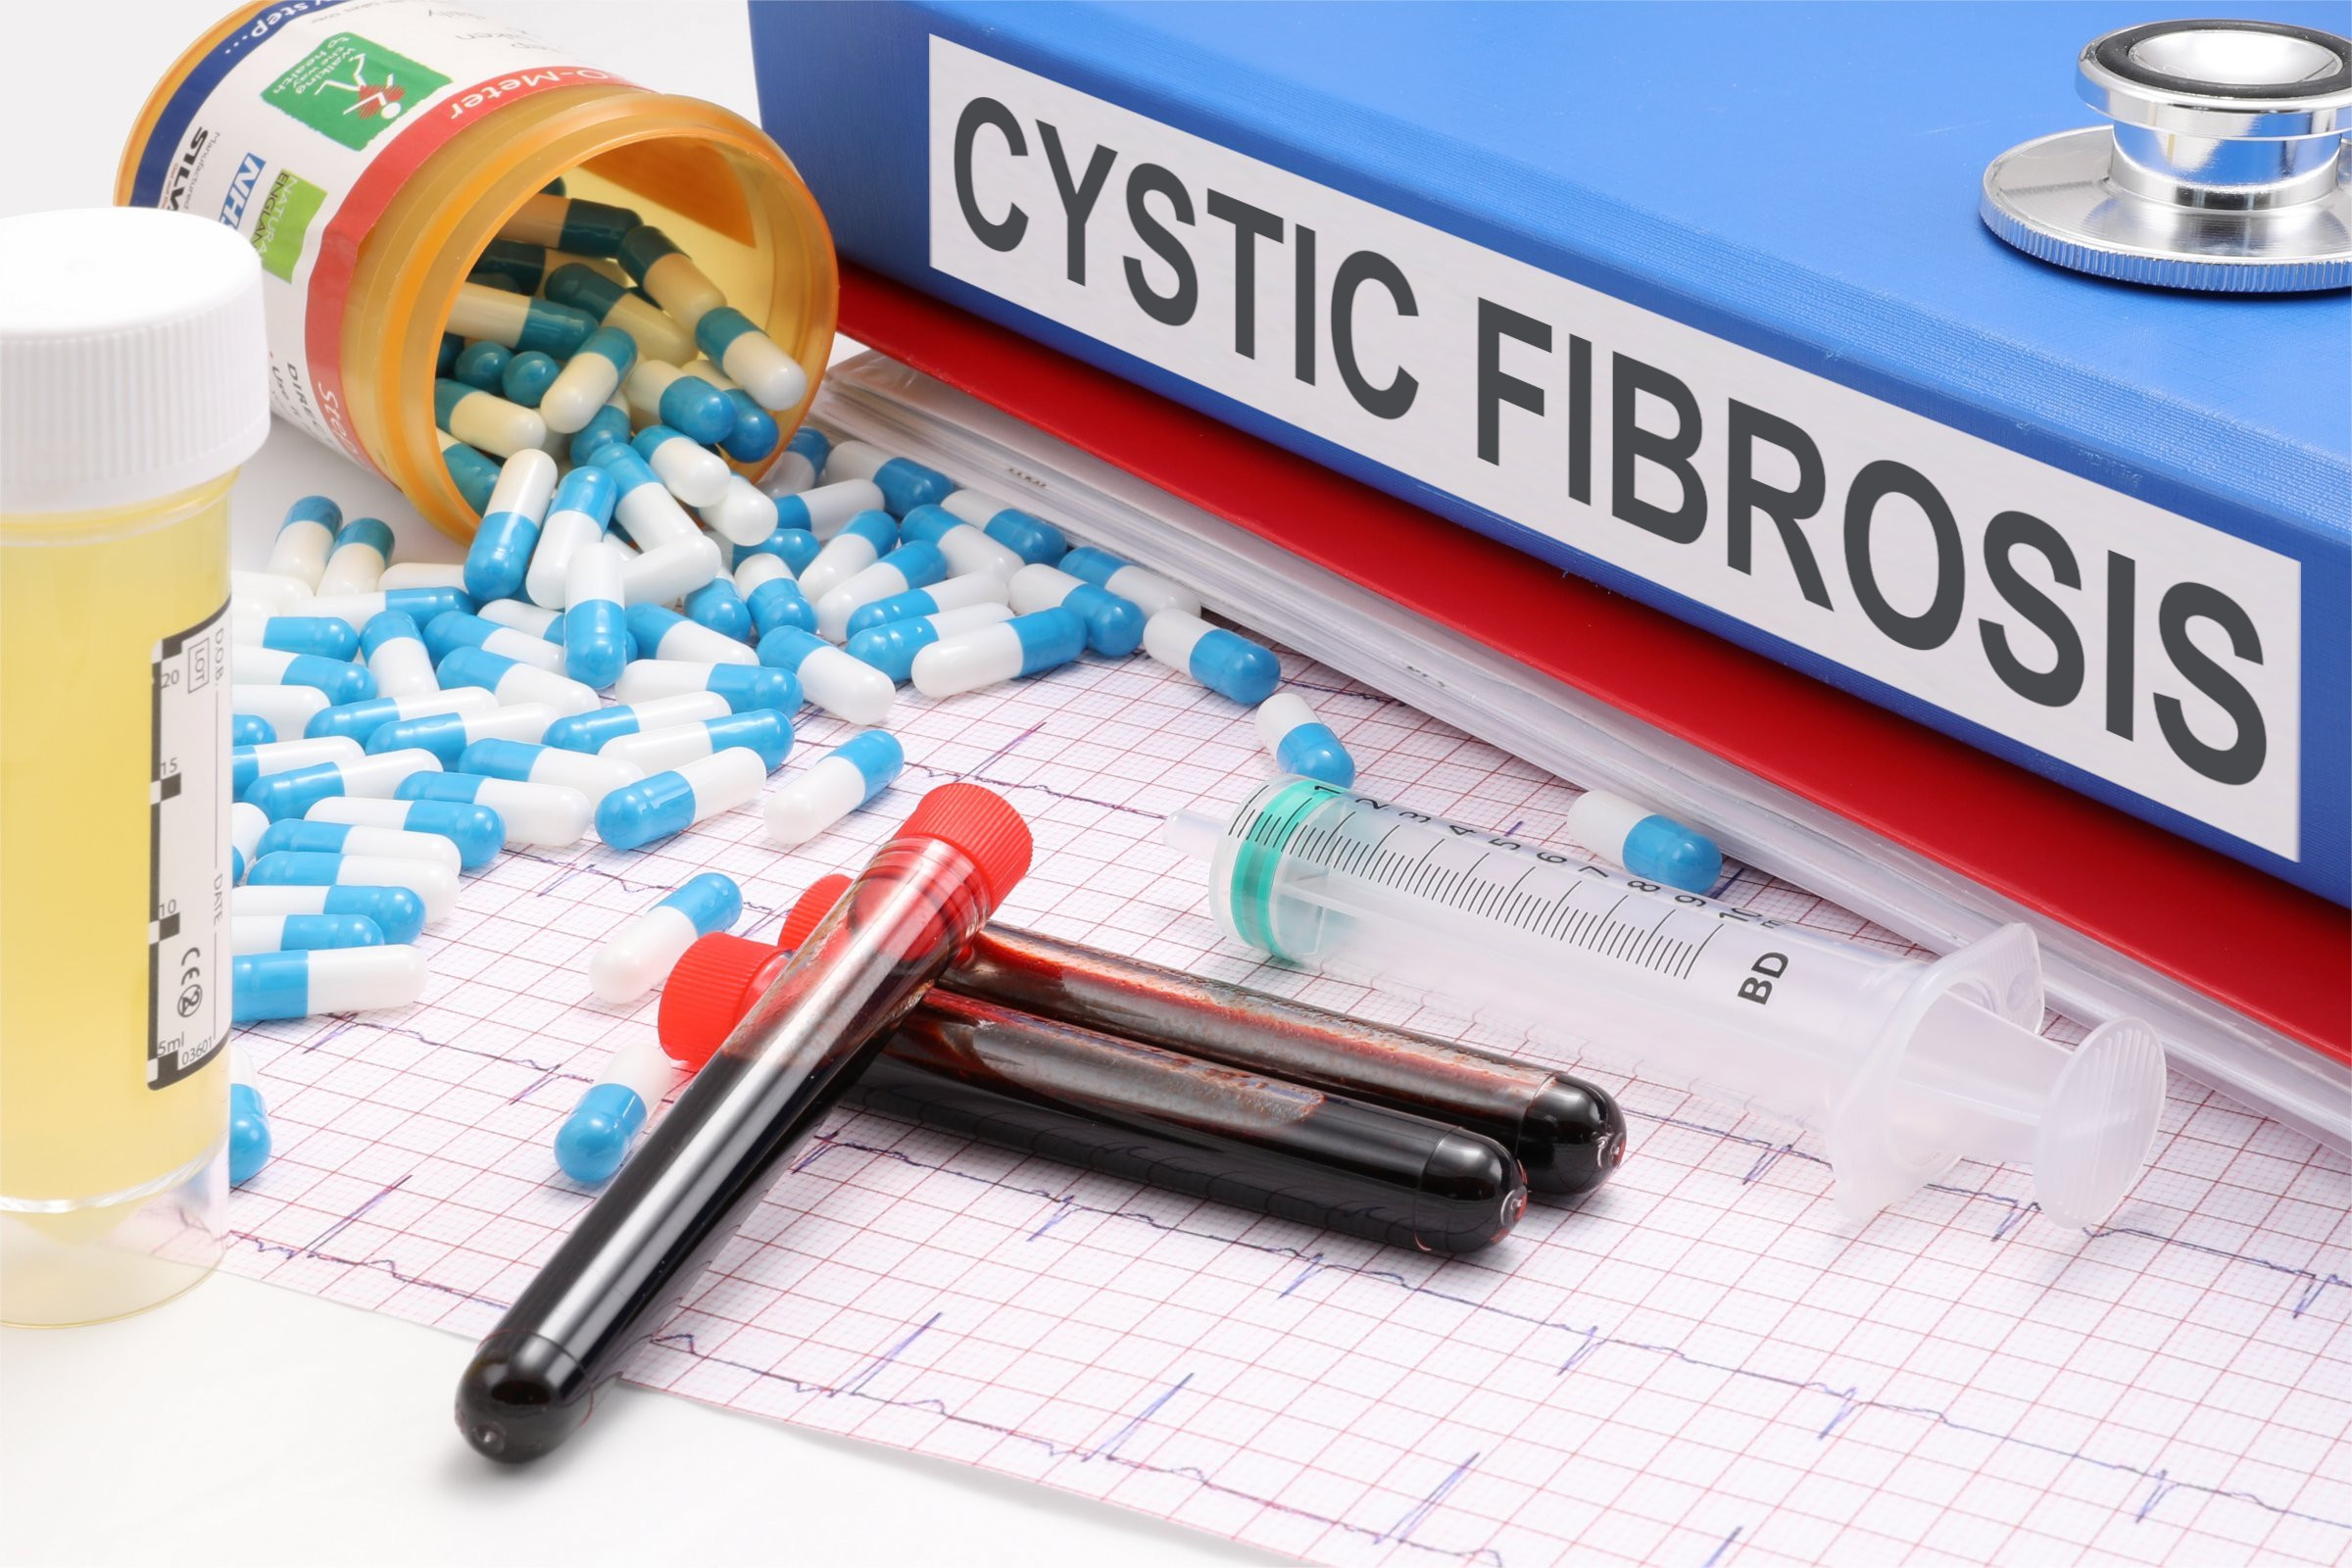 cystic-fibrosis-free-of-charge-creative-commons-medical-image